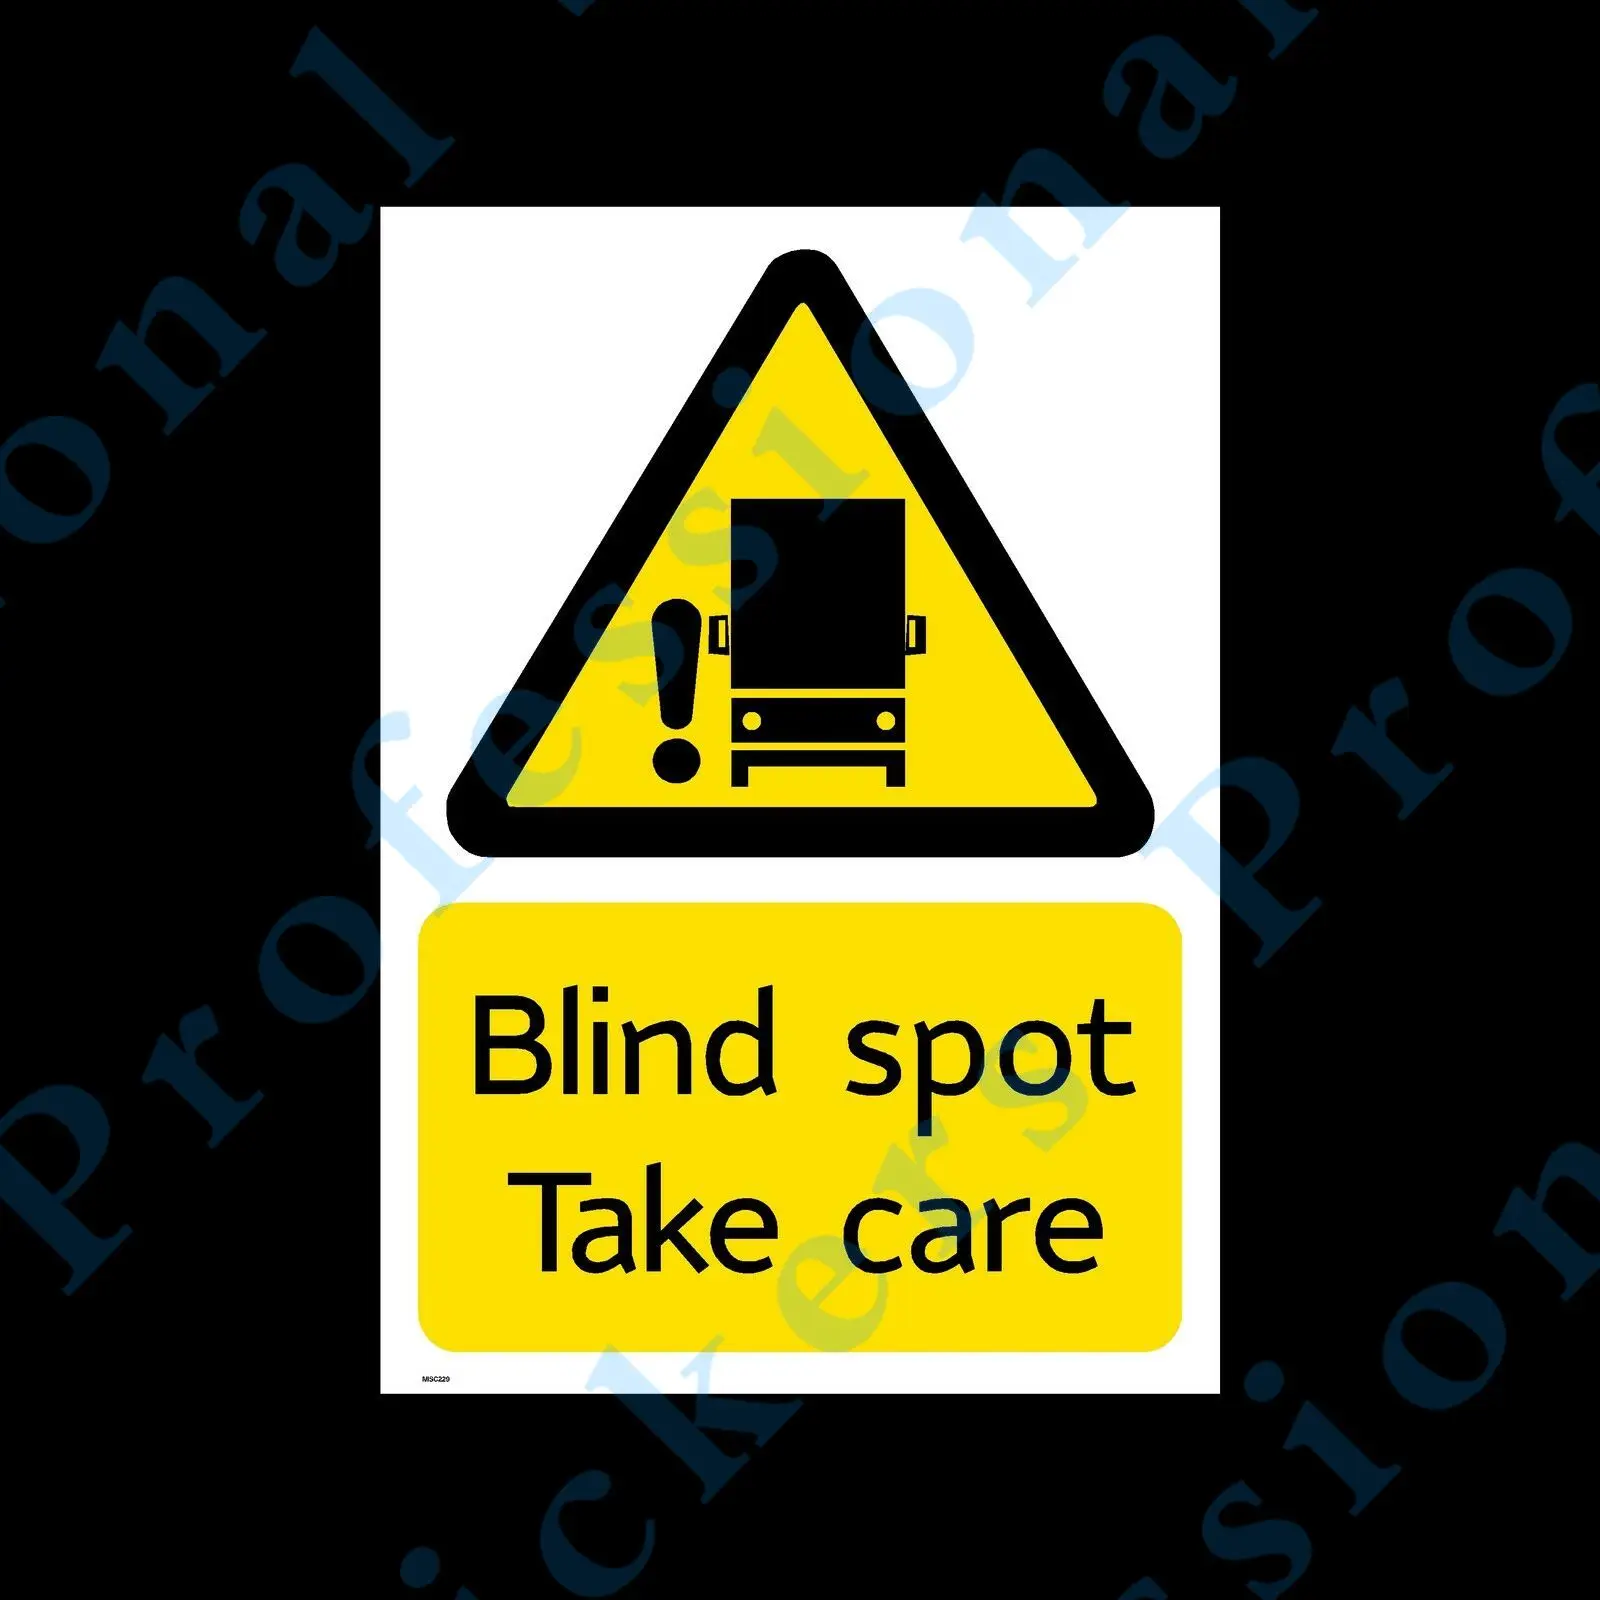 

Blind Spot - Take Care Sticker / Sign - TFL - LORRY - LONDON - CYCLIST (MISC229) Waterproof Vinyl stickers for car Motos